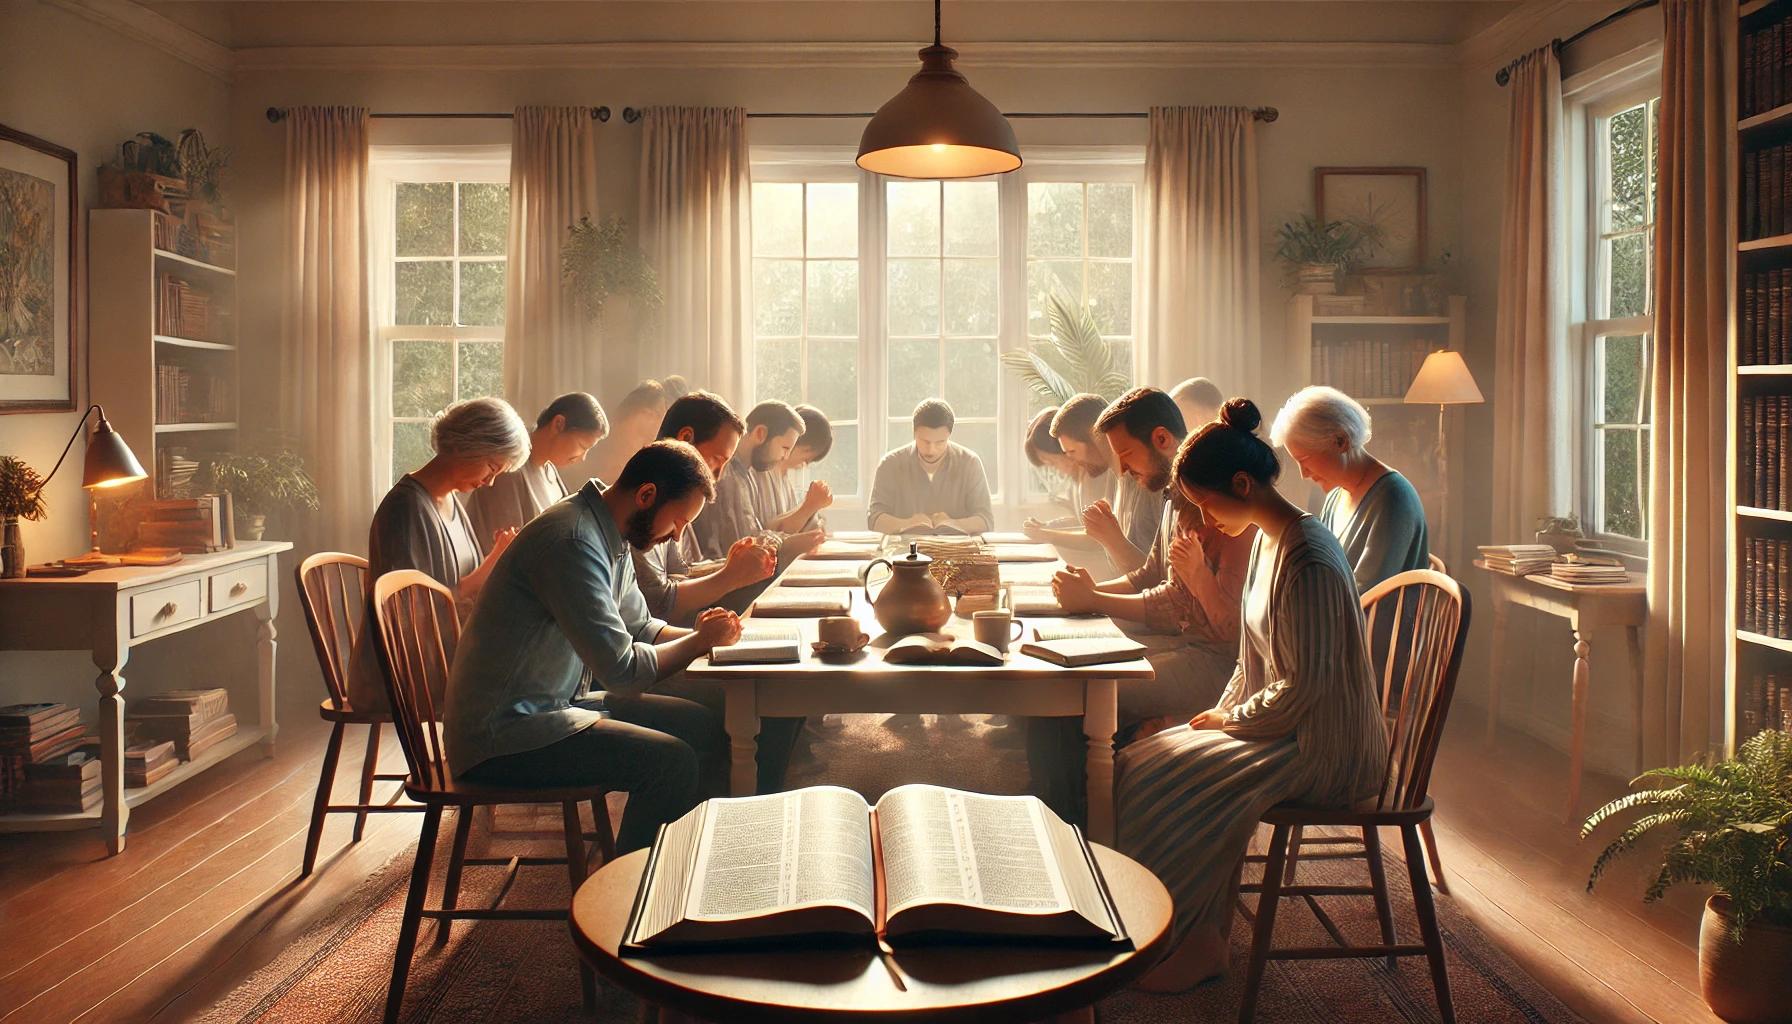 15 Prayers Before Reading The Bible